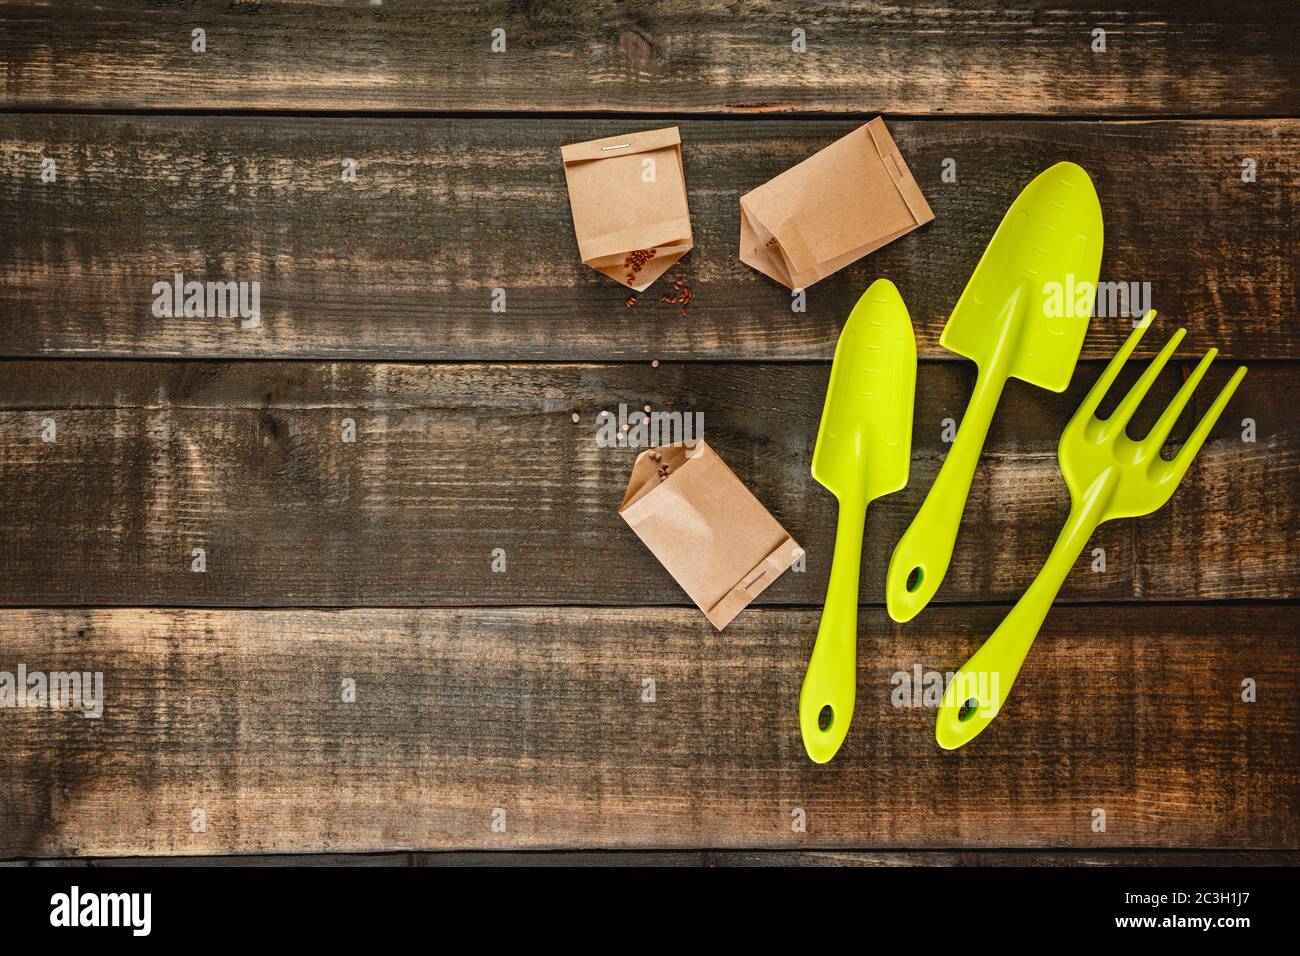 Scrapbooking Supplies And Tools Scattered On Table Stock Photo